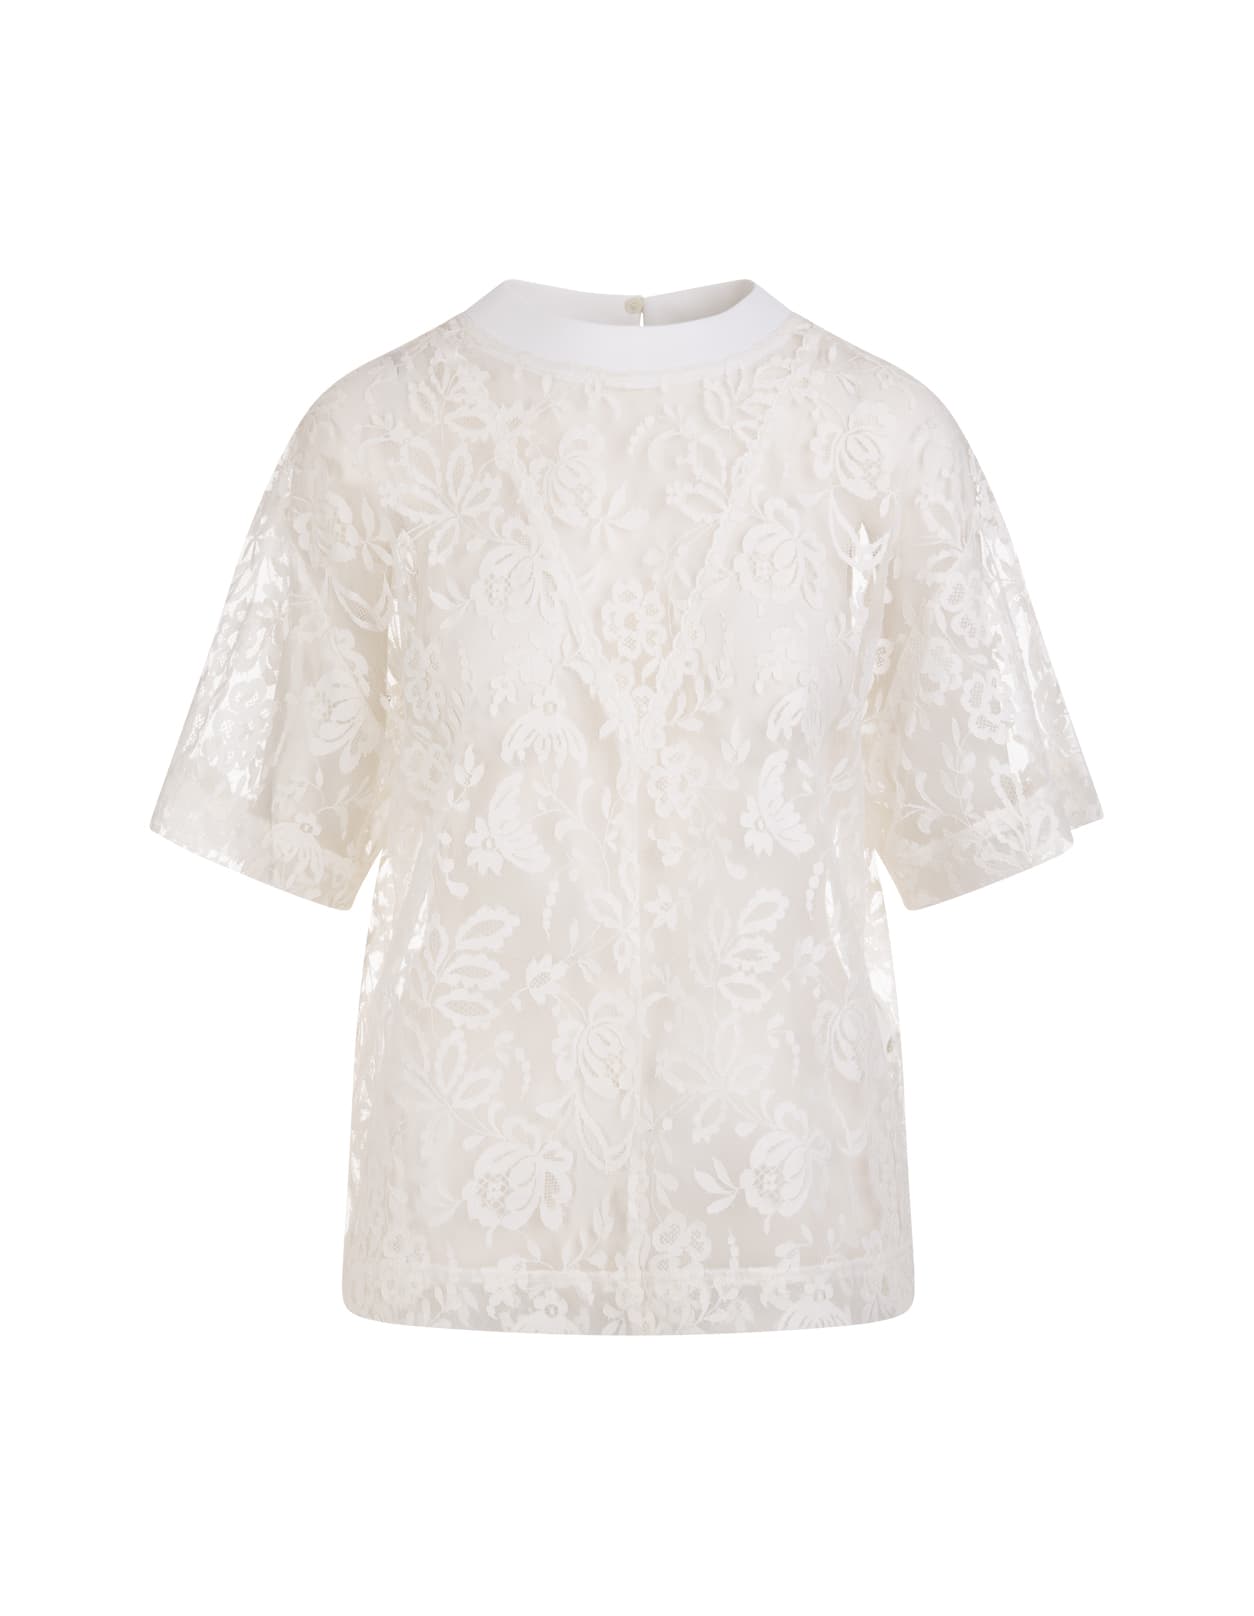 Alexander McQueen Short Sleeve Top In Tulle And Ivory Floral Lace